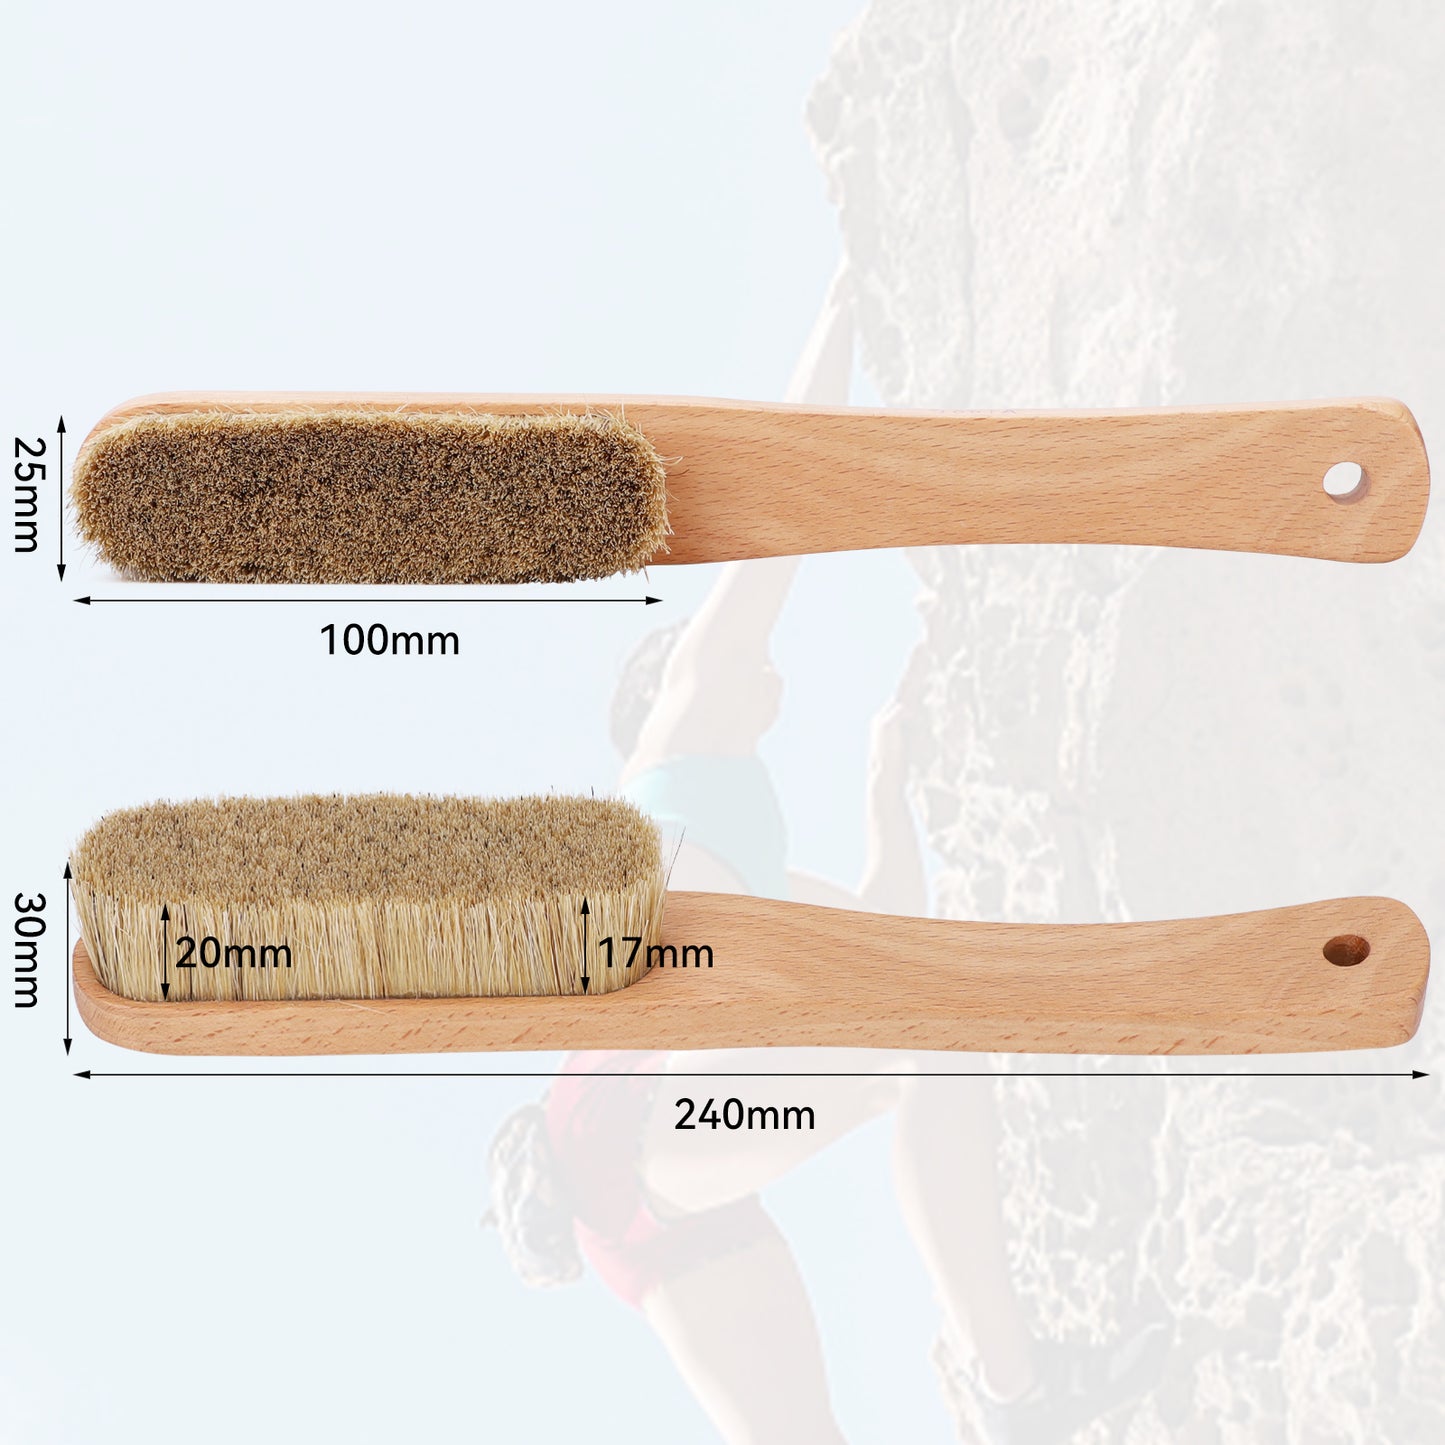 Premium Rock Climbing Brush with Thick Ultra Durable Boar's Hair Bristles, Bouldering Brush with Strong Handle, Uni-Sex Boulder Brushes as Rock Climbing Gift (CJ-CB2001A-B-TS)